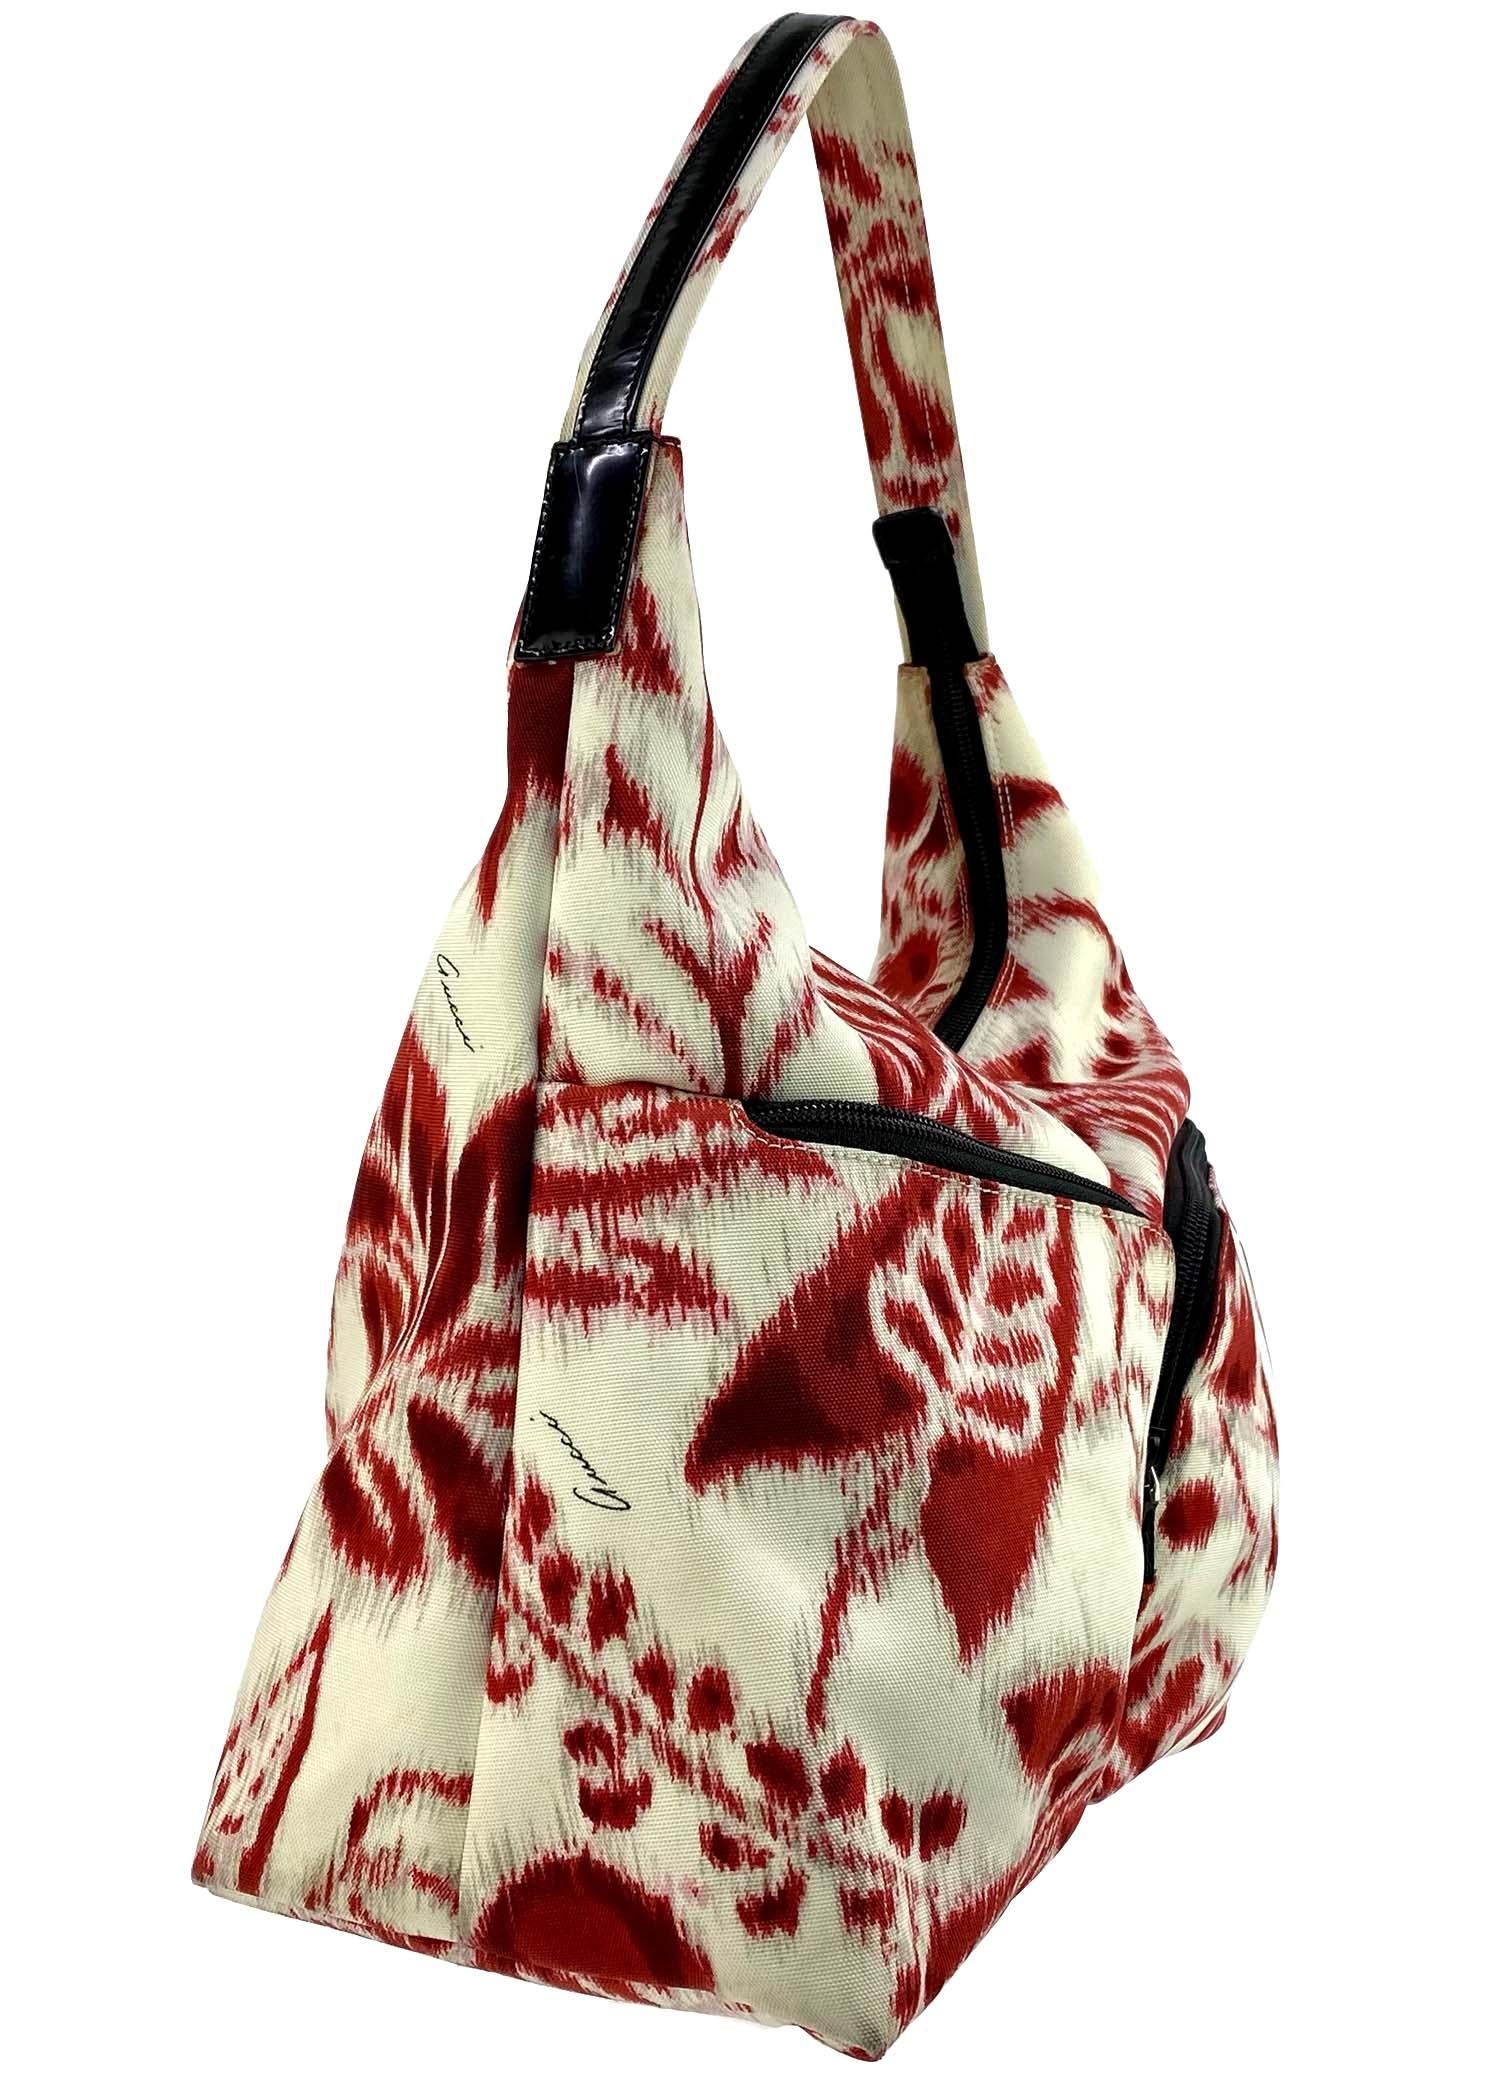 Women's S/S 2000 Gucci by Tom Ford 'Havana' Print Red and White Hobo